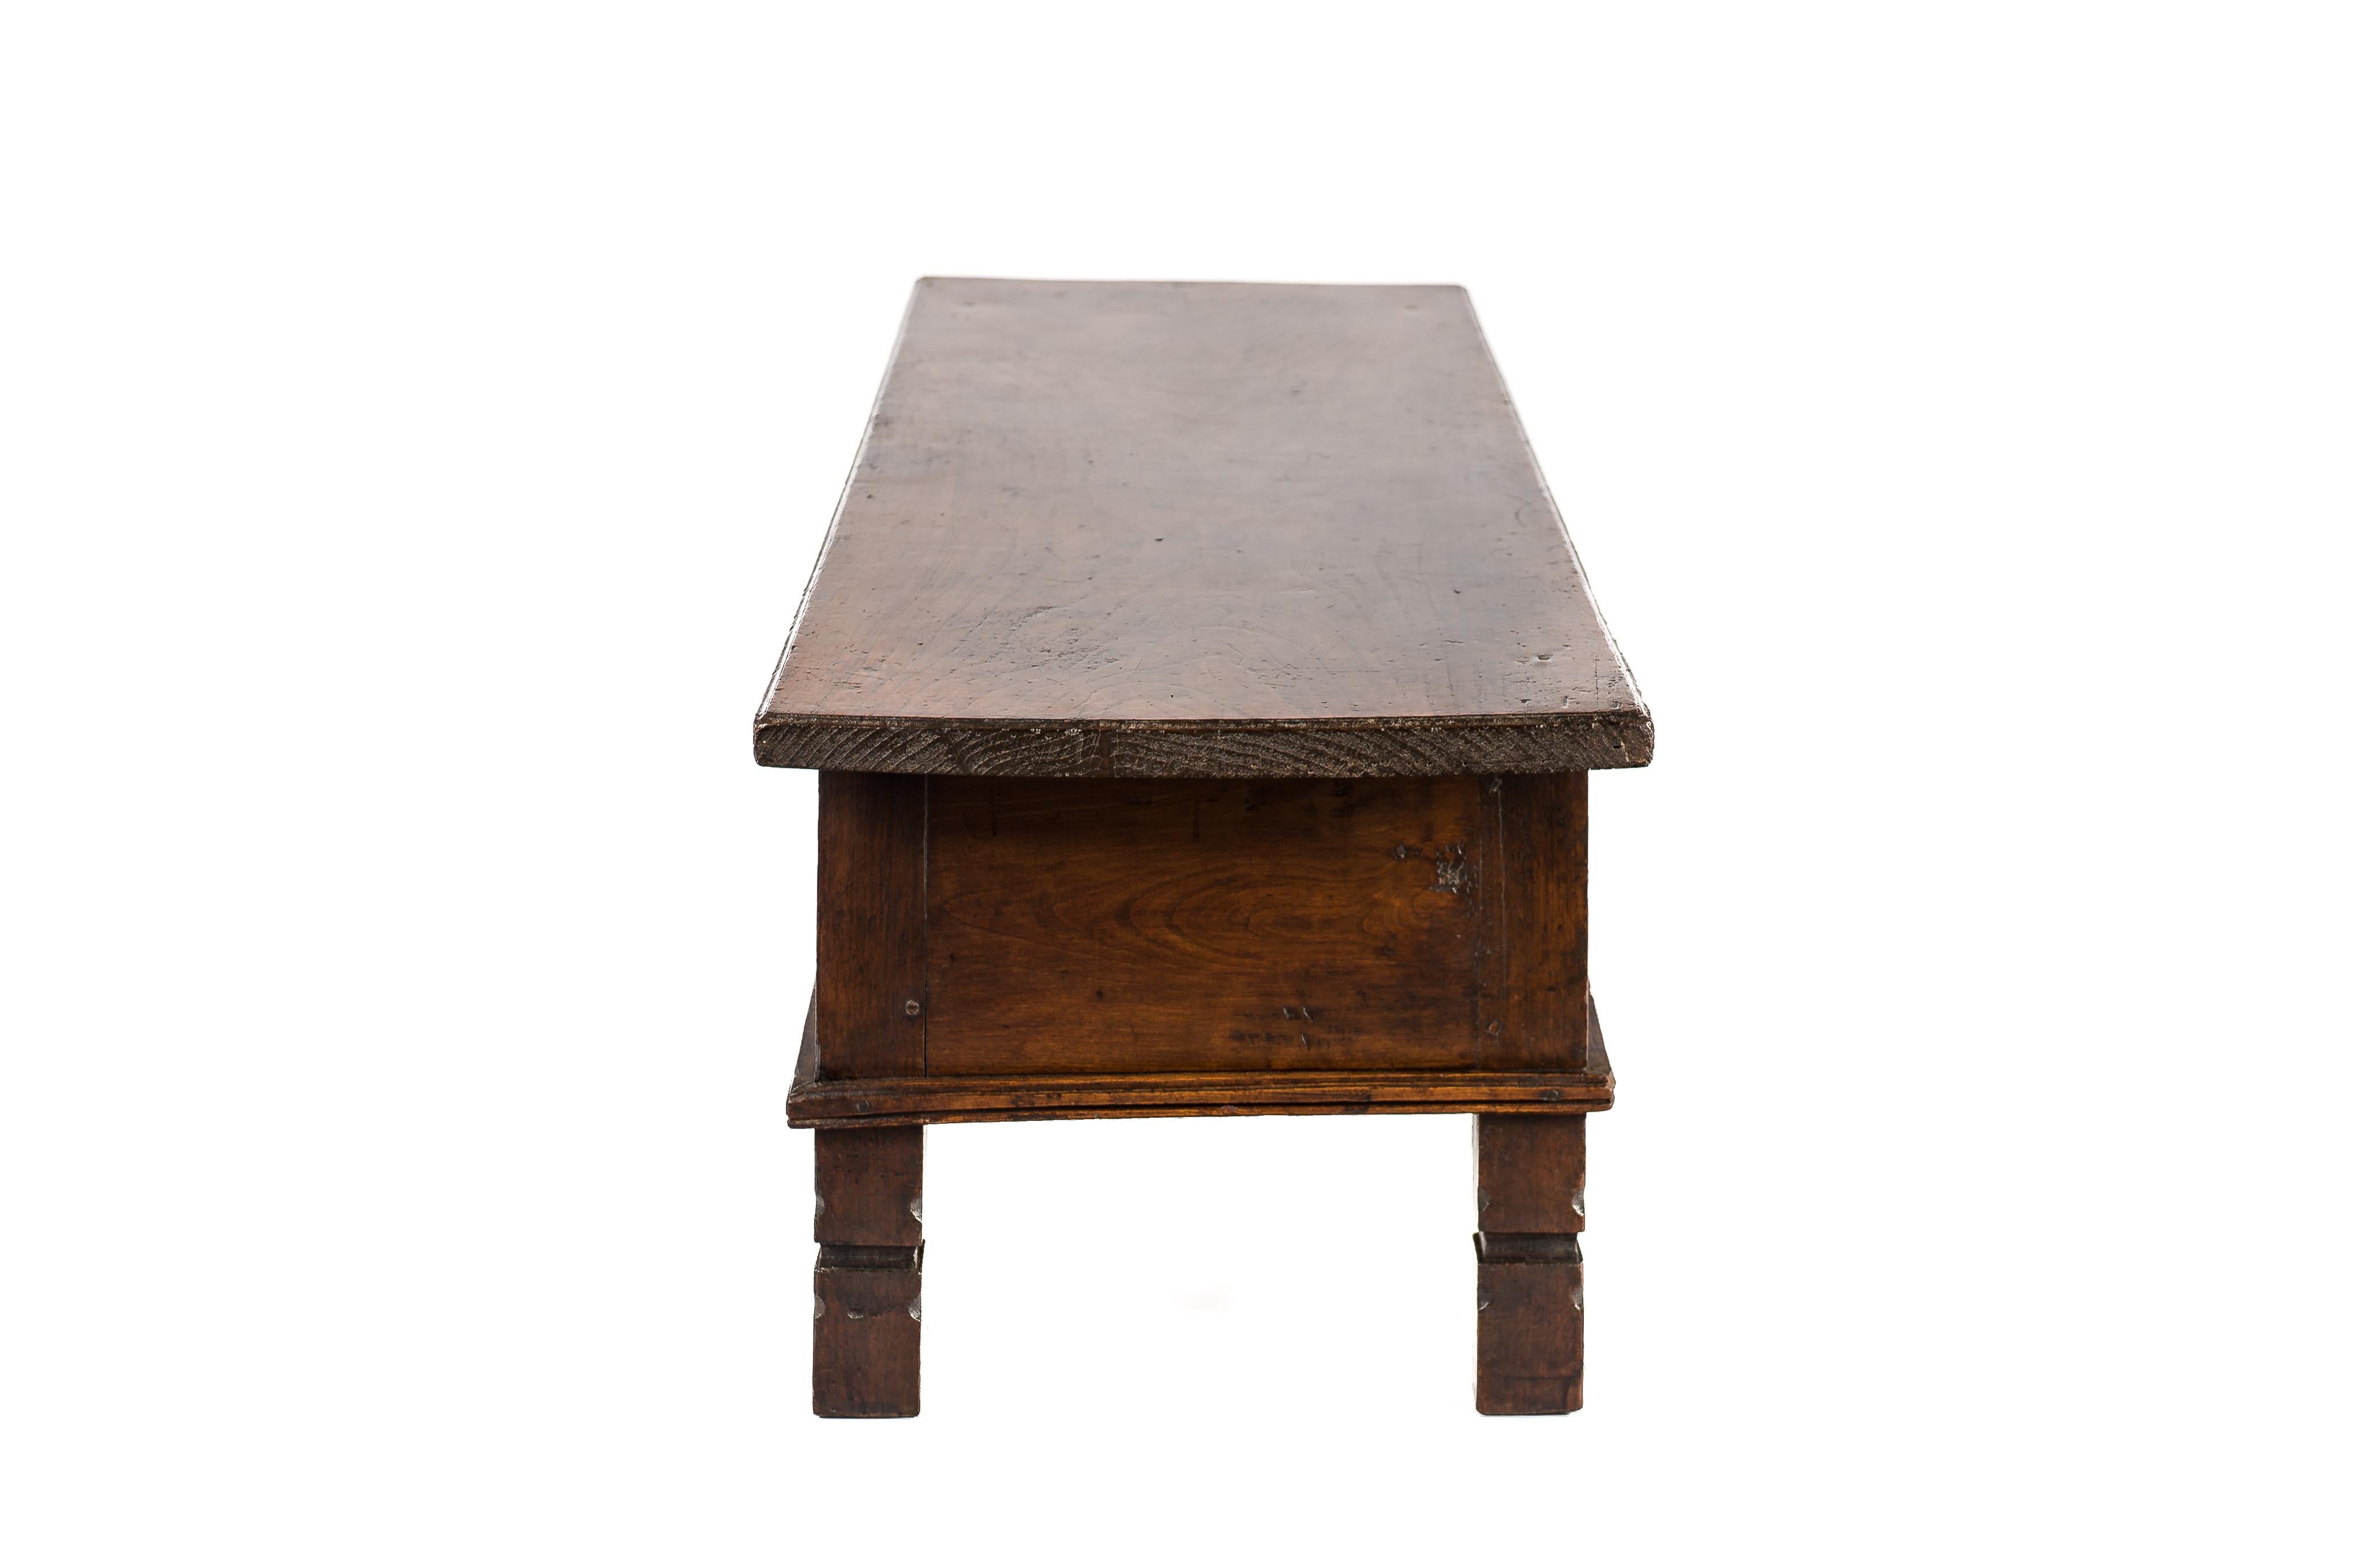 Forged Antique Late 18th-Century Rustic Spanish Warm Brown Chestnut Coffee Table